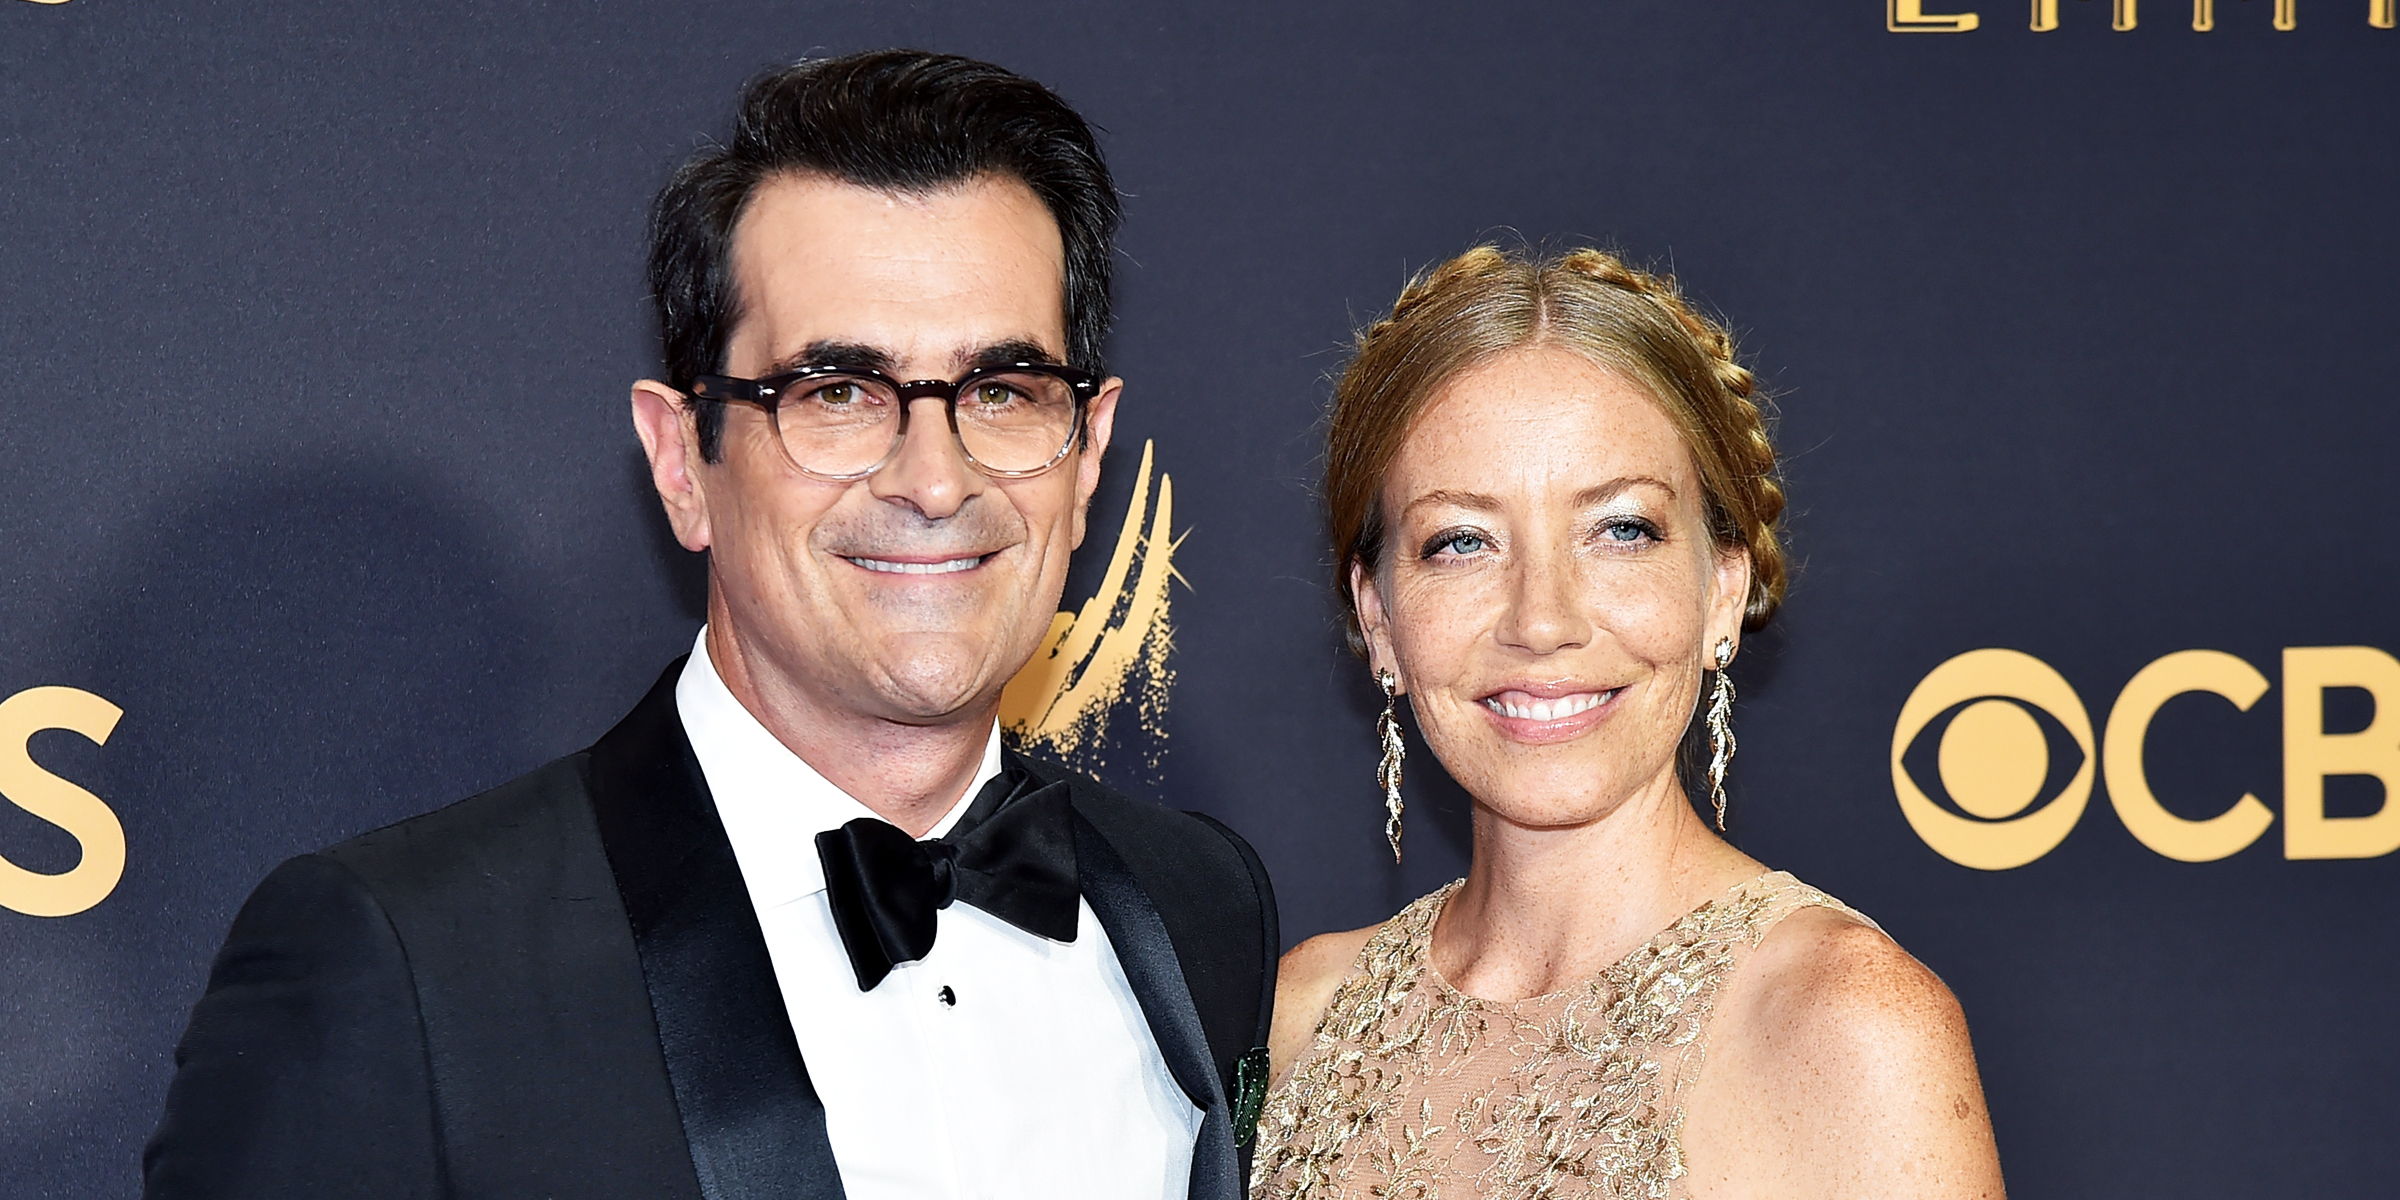 Actor Ty Burrell and his wife Holly Burrell | Source: Getty Images